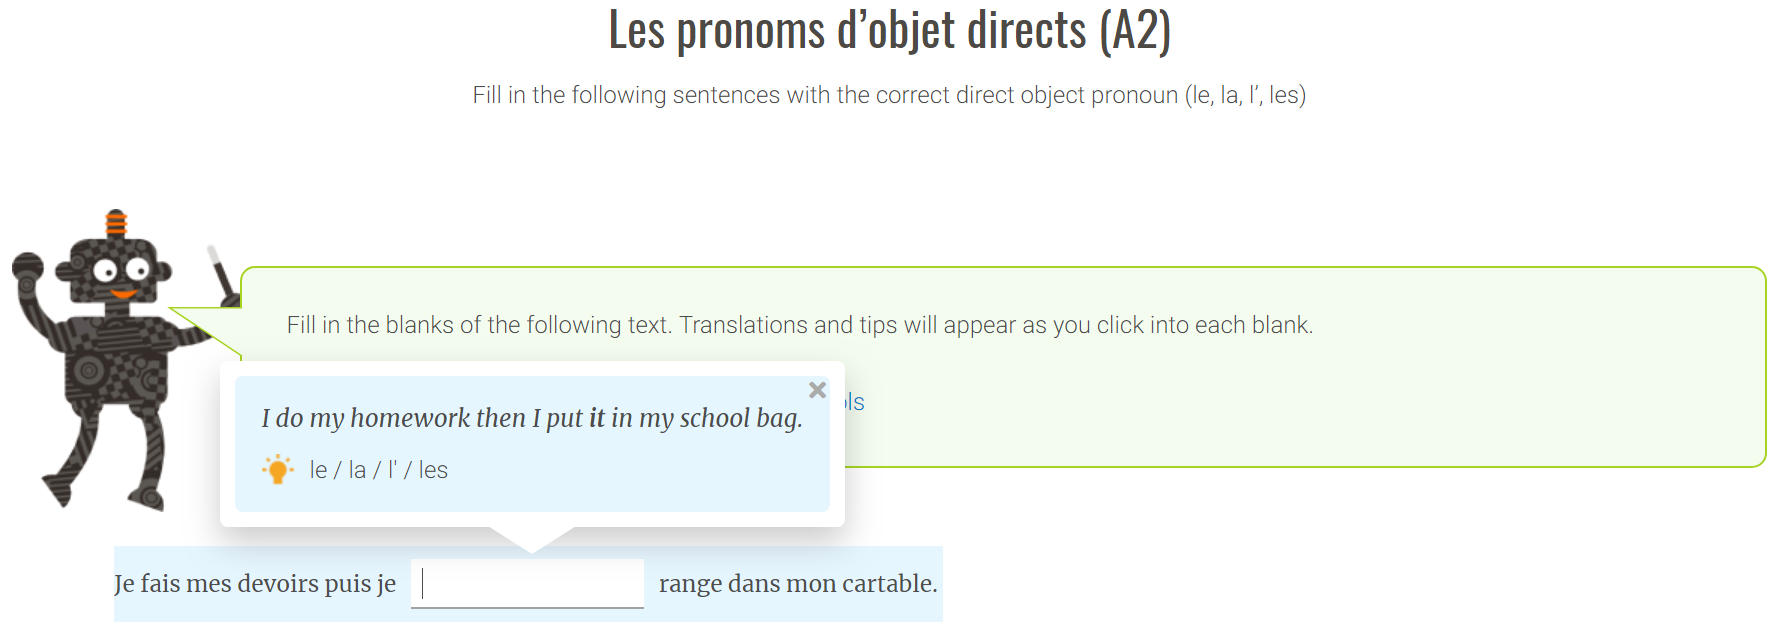 French gapfill exercise